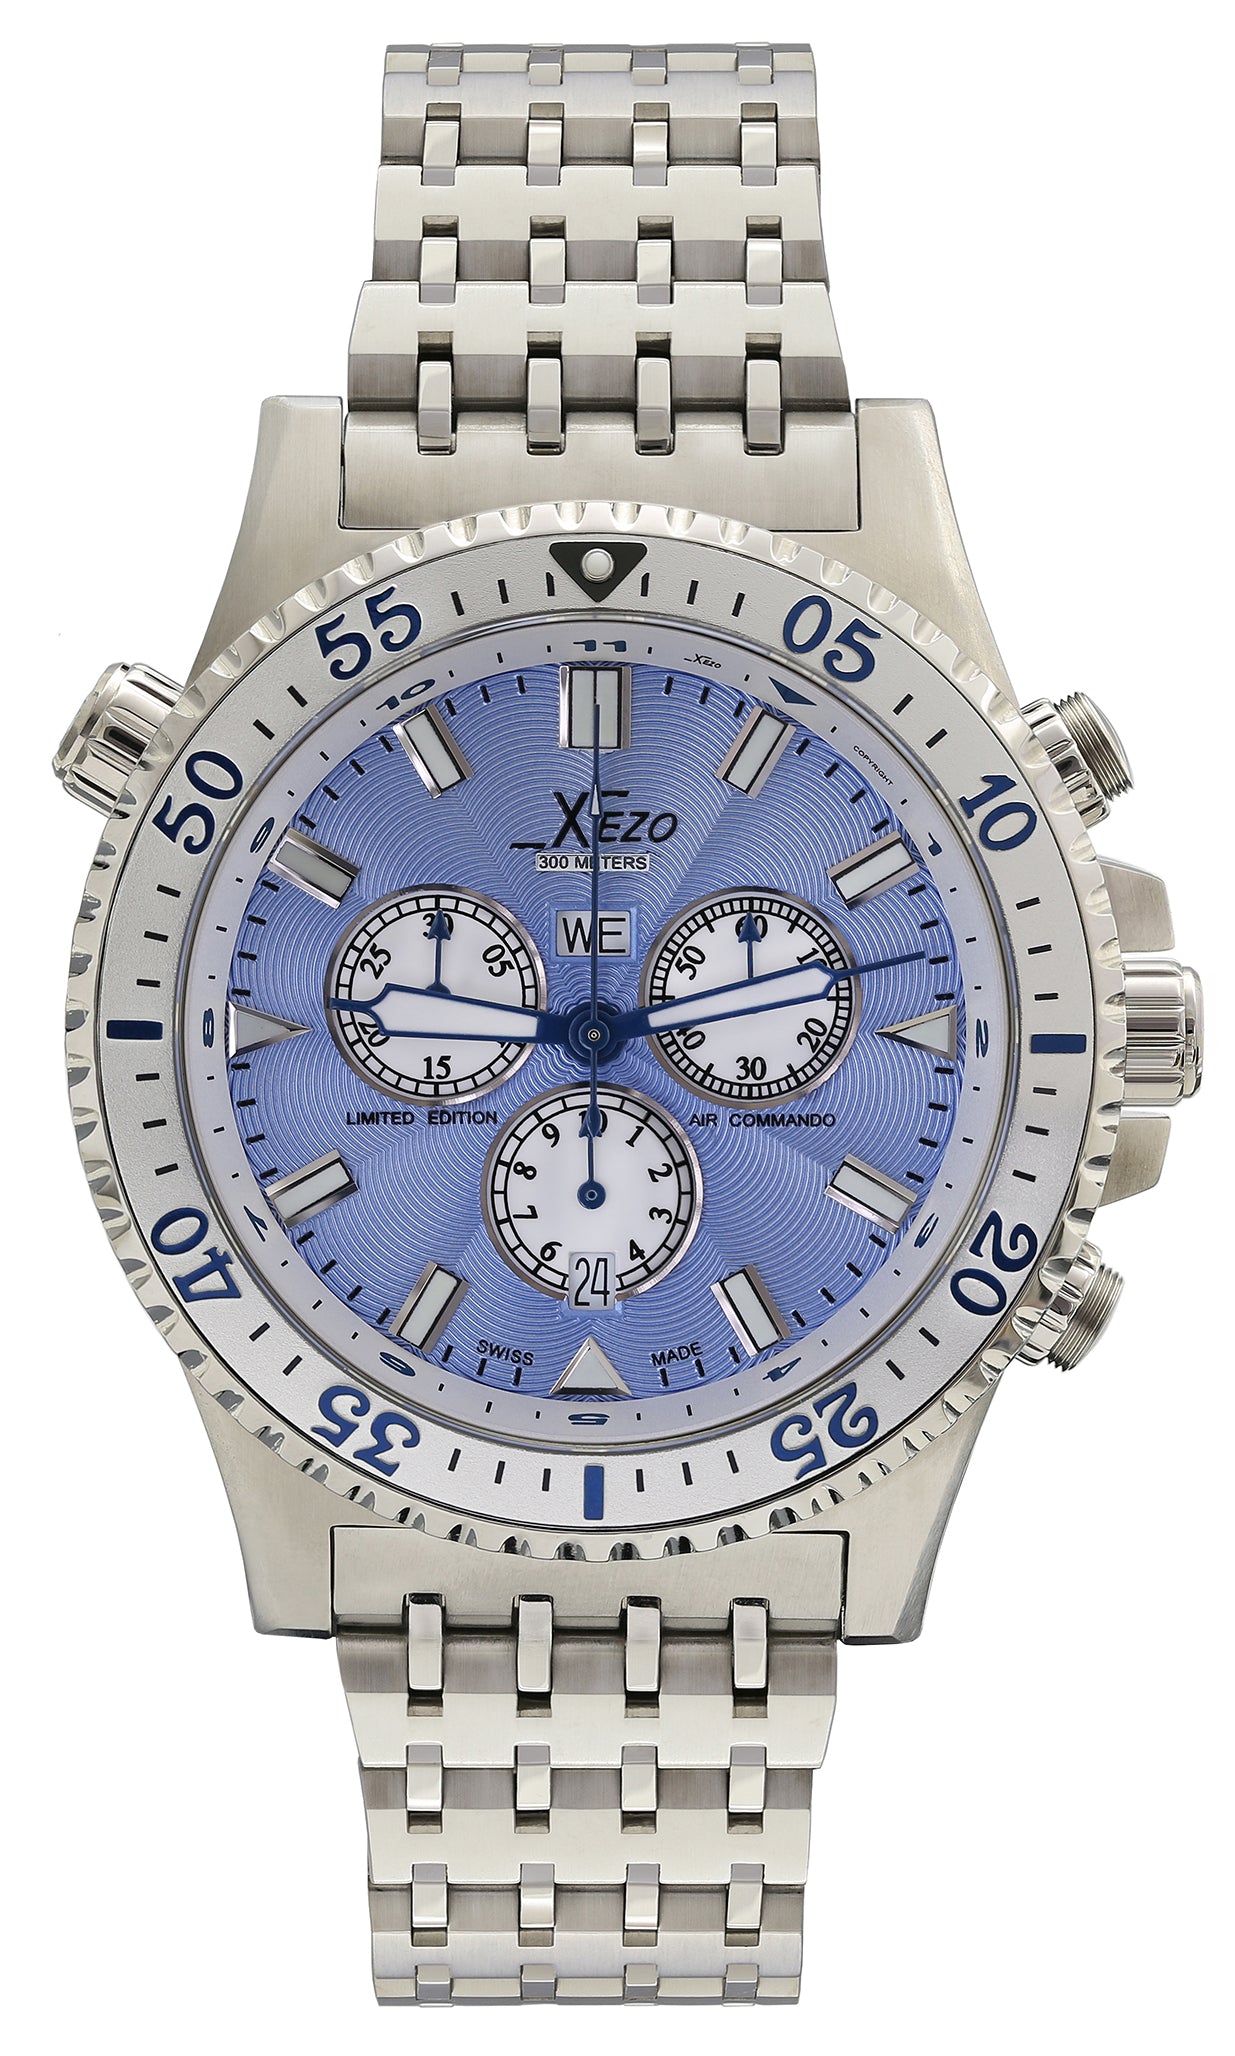 Xezo - Front view of the Air Commando D45-SB watch